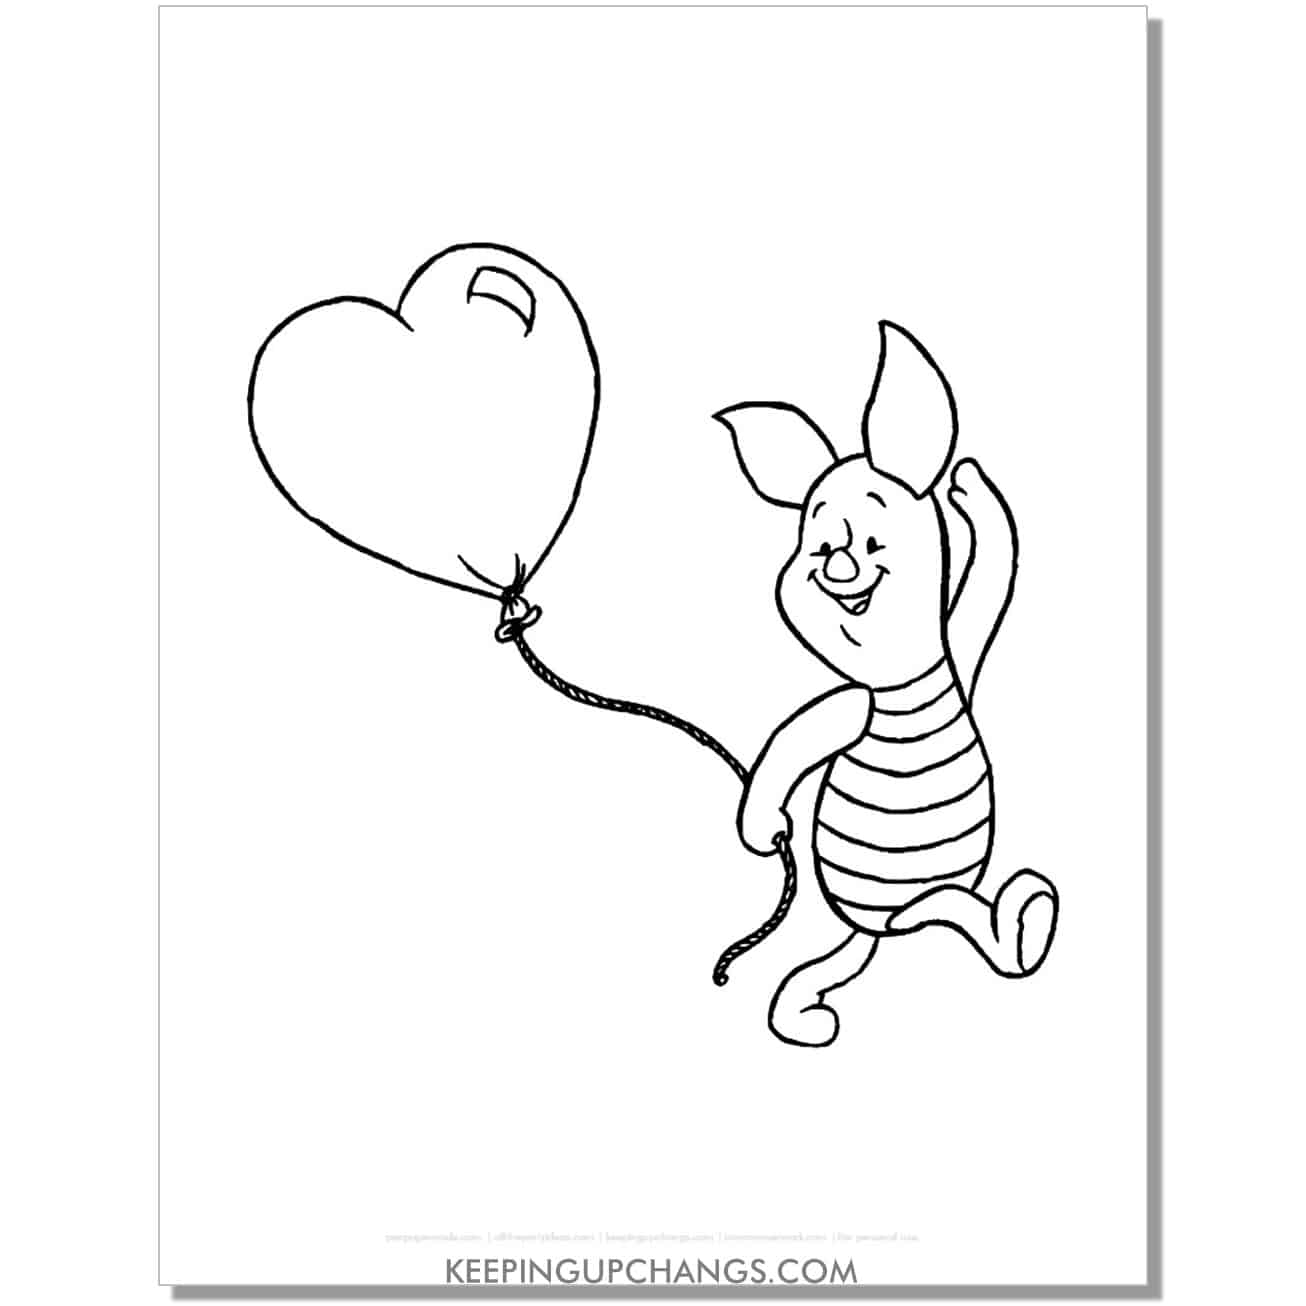 piglet holding heart balloon coloring page, sheet.